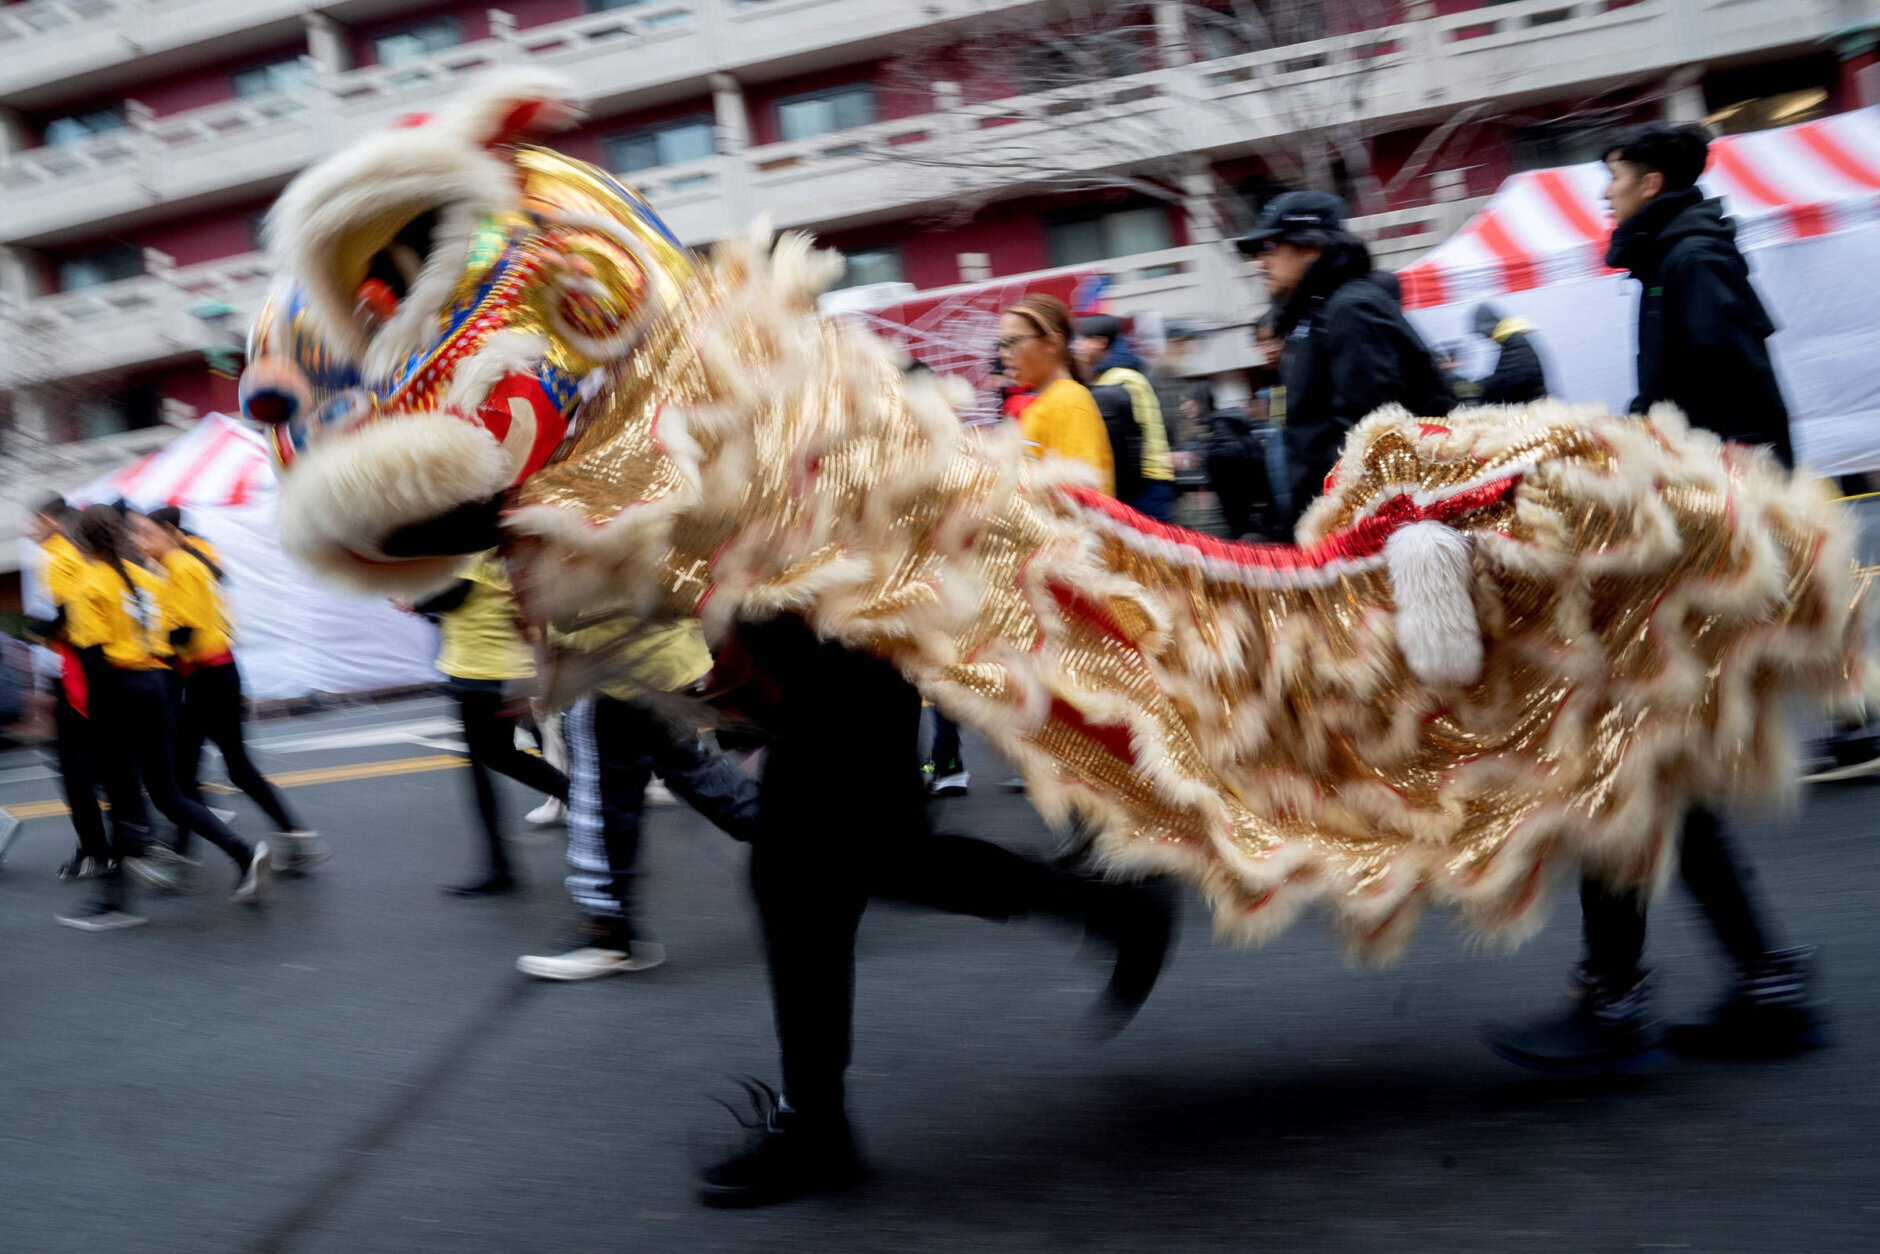 Participants dance ahead of the Lunar New Year Parade in the Chinatown neighborhood of Washington, DC, on January 22, 2023. - 2023 is the year of the rabbit in the Chinese horoscope. (Photo by Stefani Reynolds / AFP) (Photo by STEFANI REYNOLDS/AFP via Getty Images)